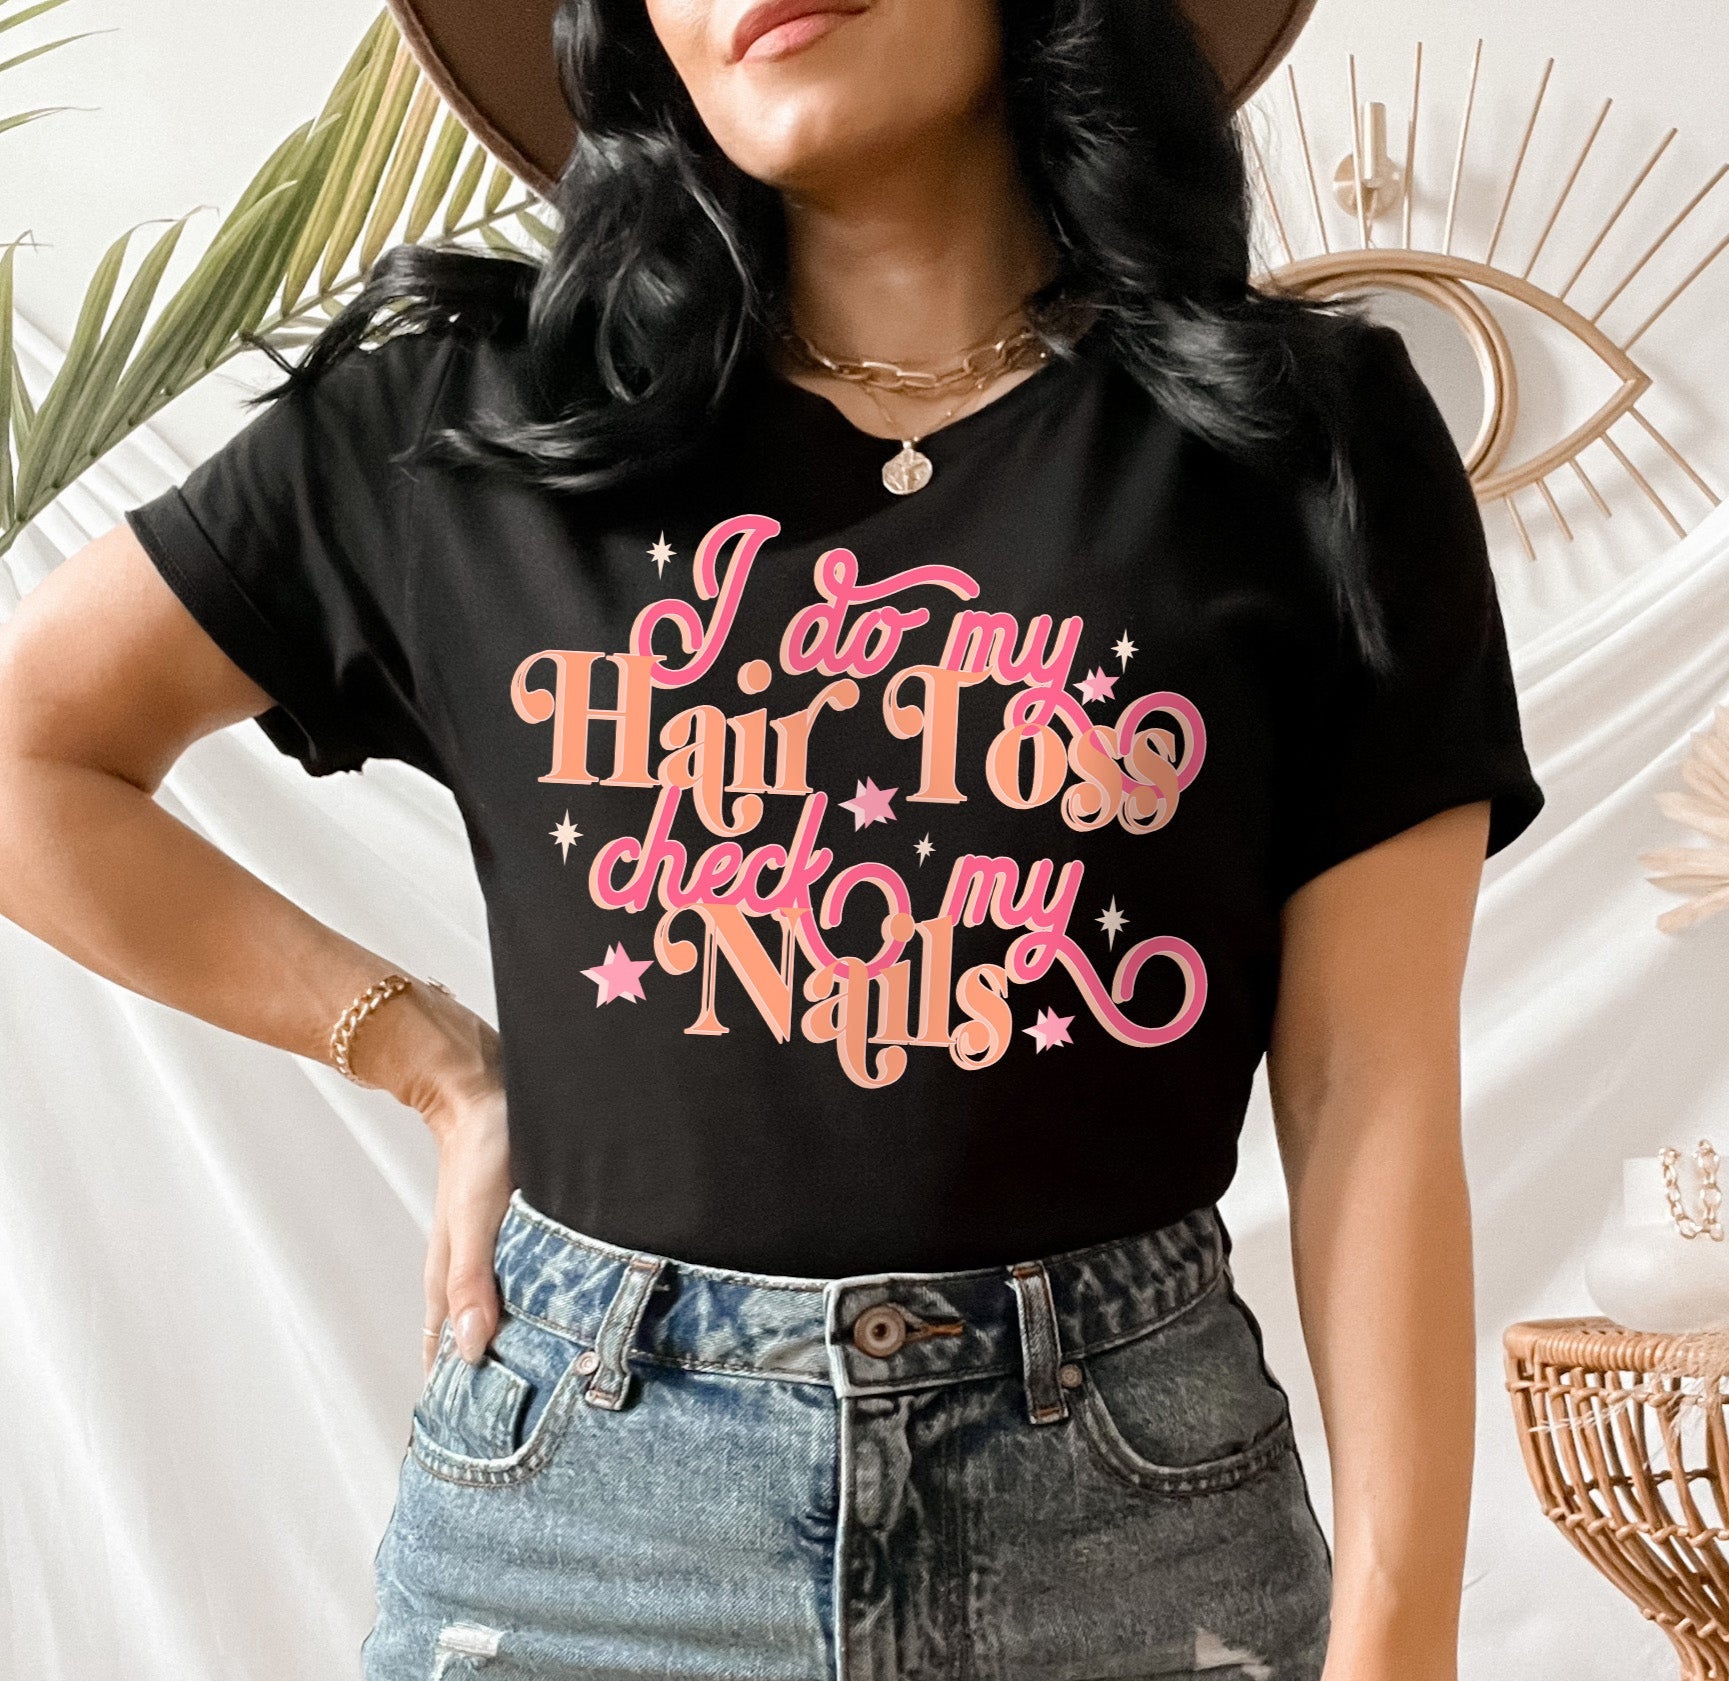 lizzo concert shirt that says I do my hair toss check my nails - HighCiti